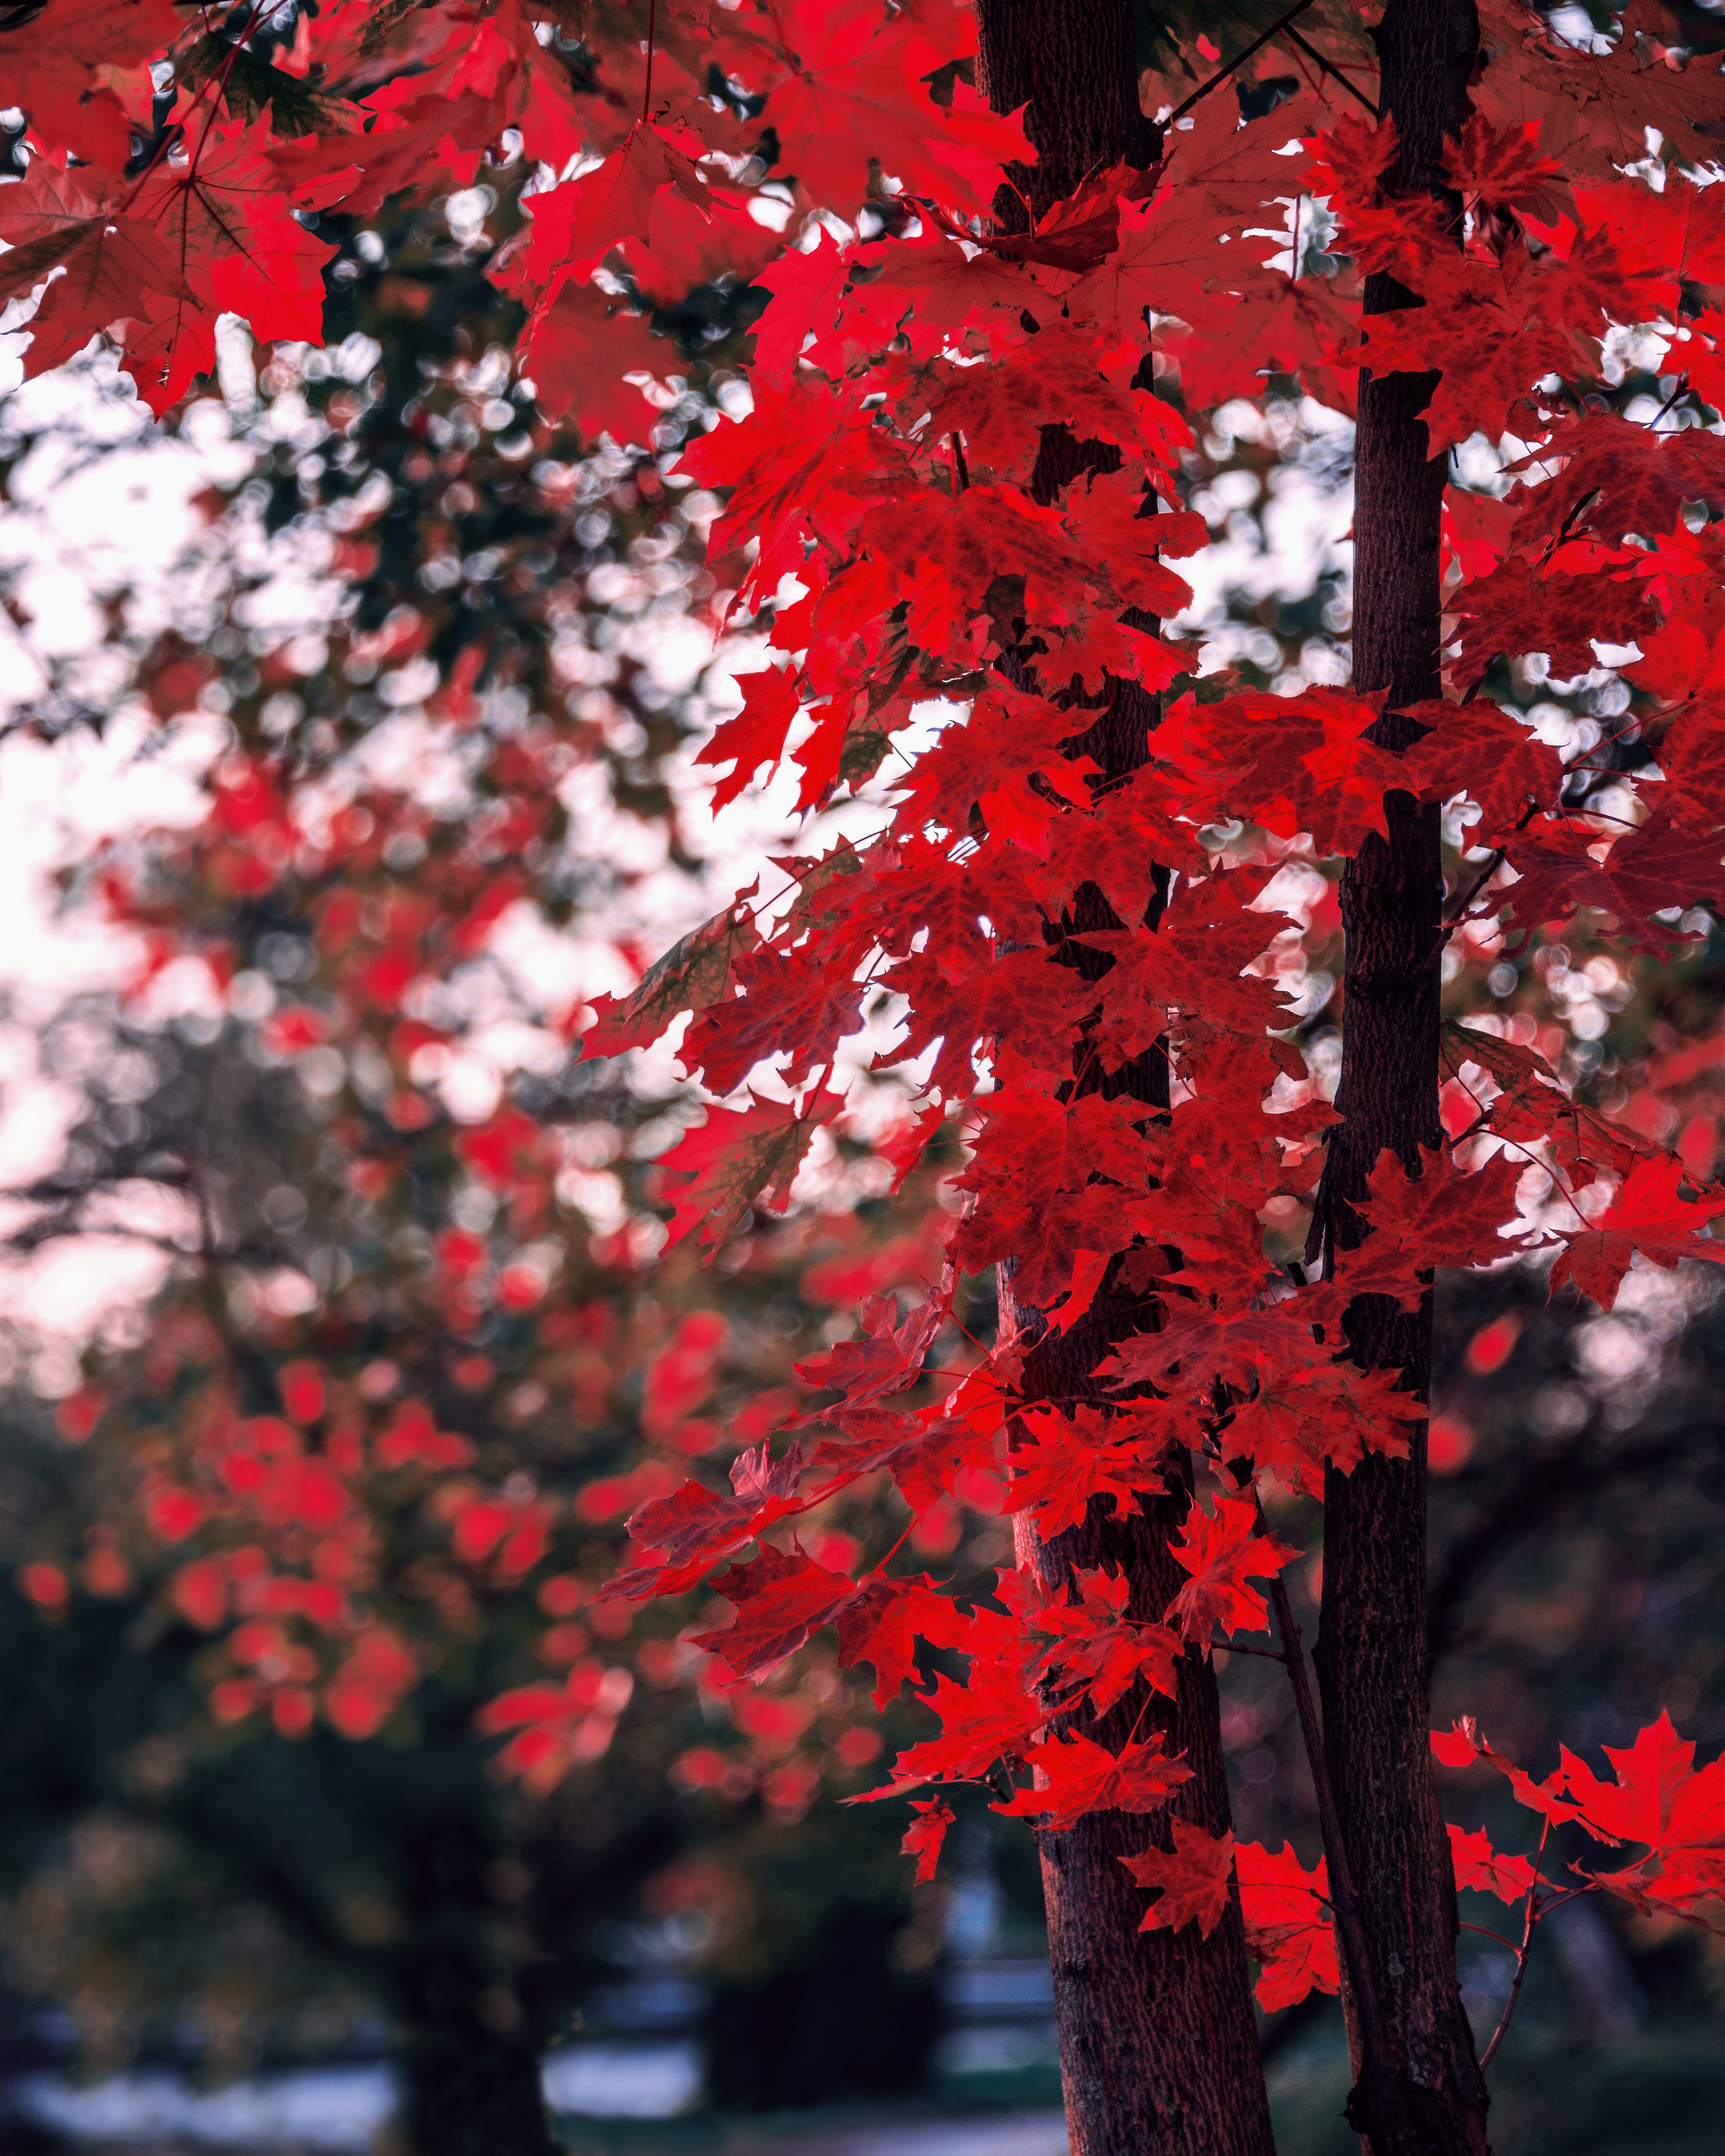 Download wallpaper 4016x5020 maple, leaves, autumn, tree, branches, blur hd  background